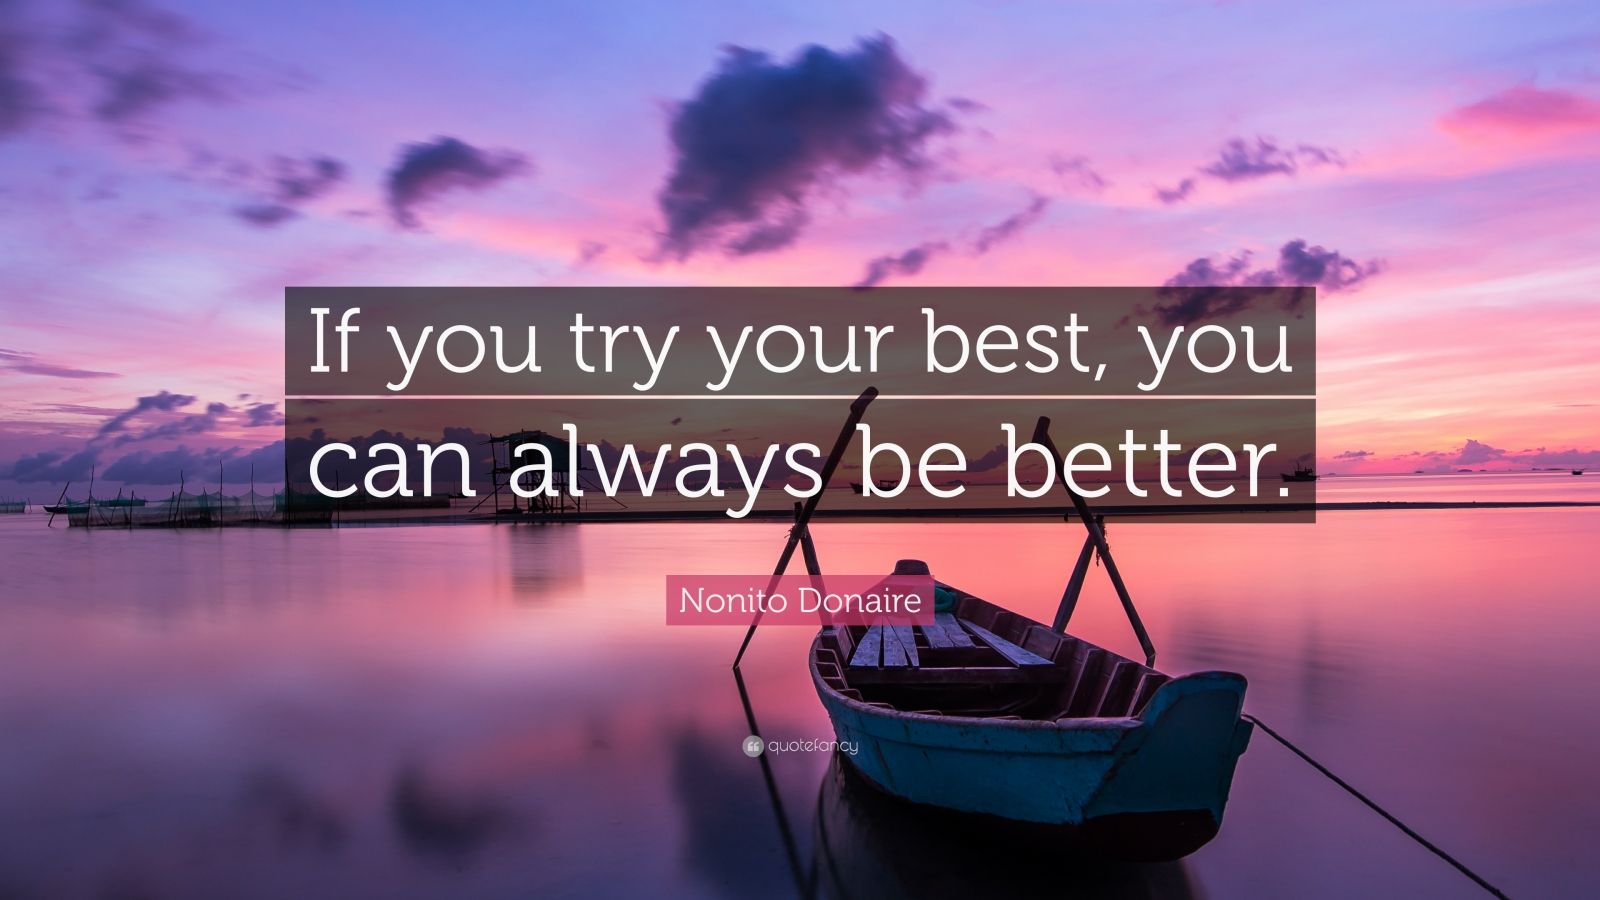 Nonito Donaire Quote: “If you try your best, you can always be better